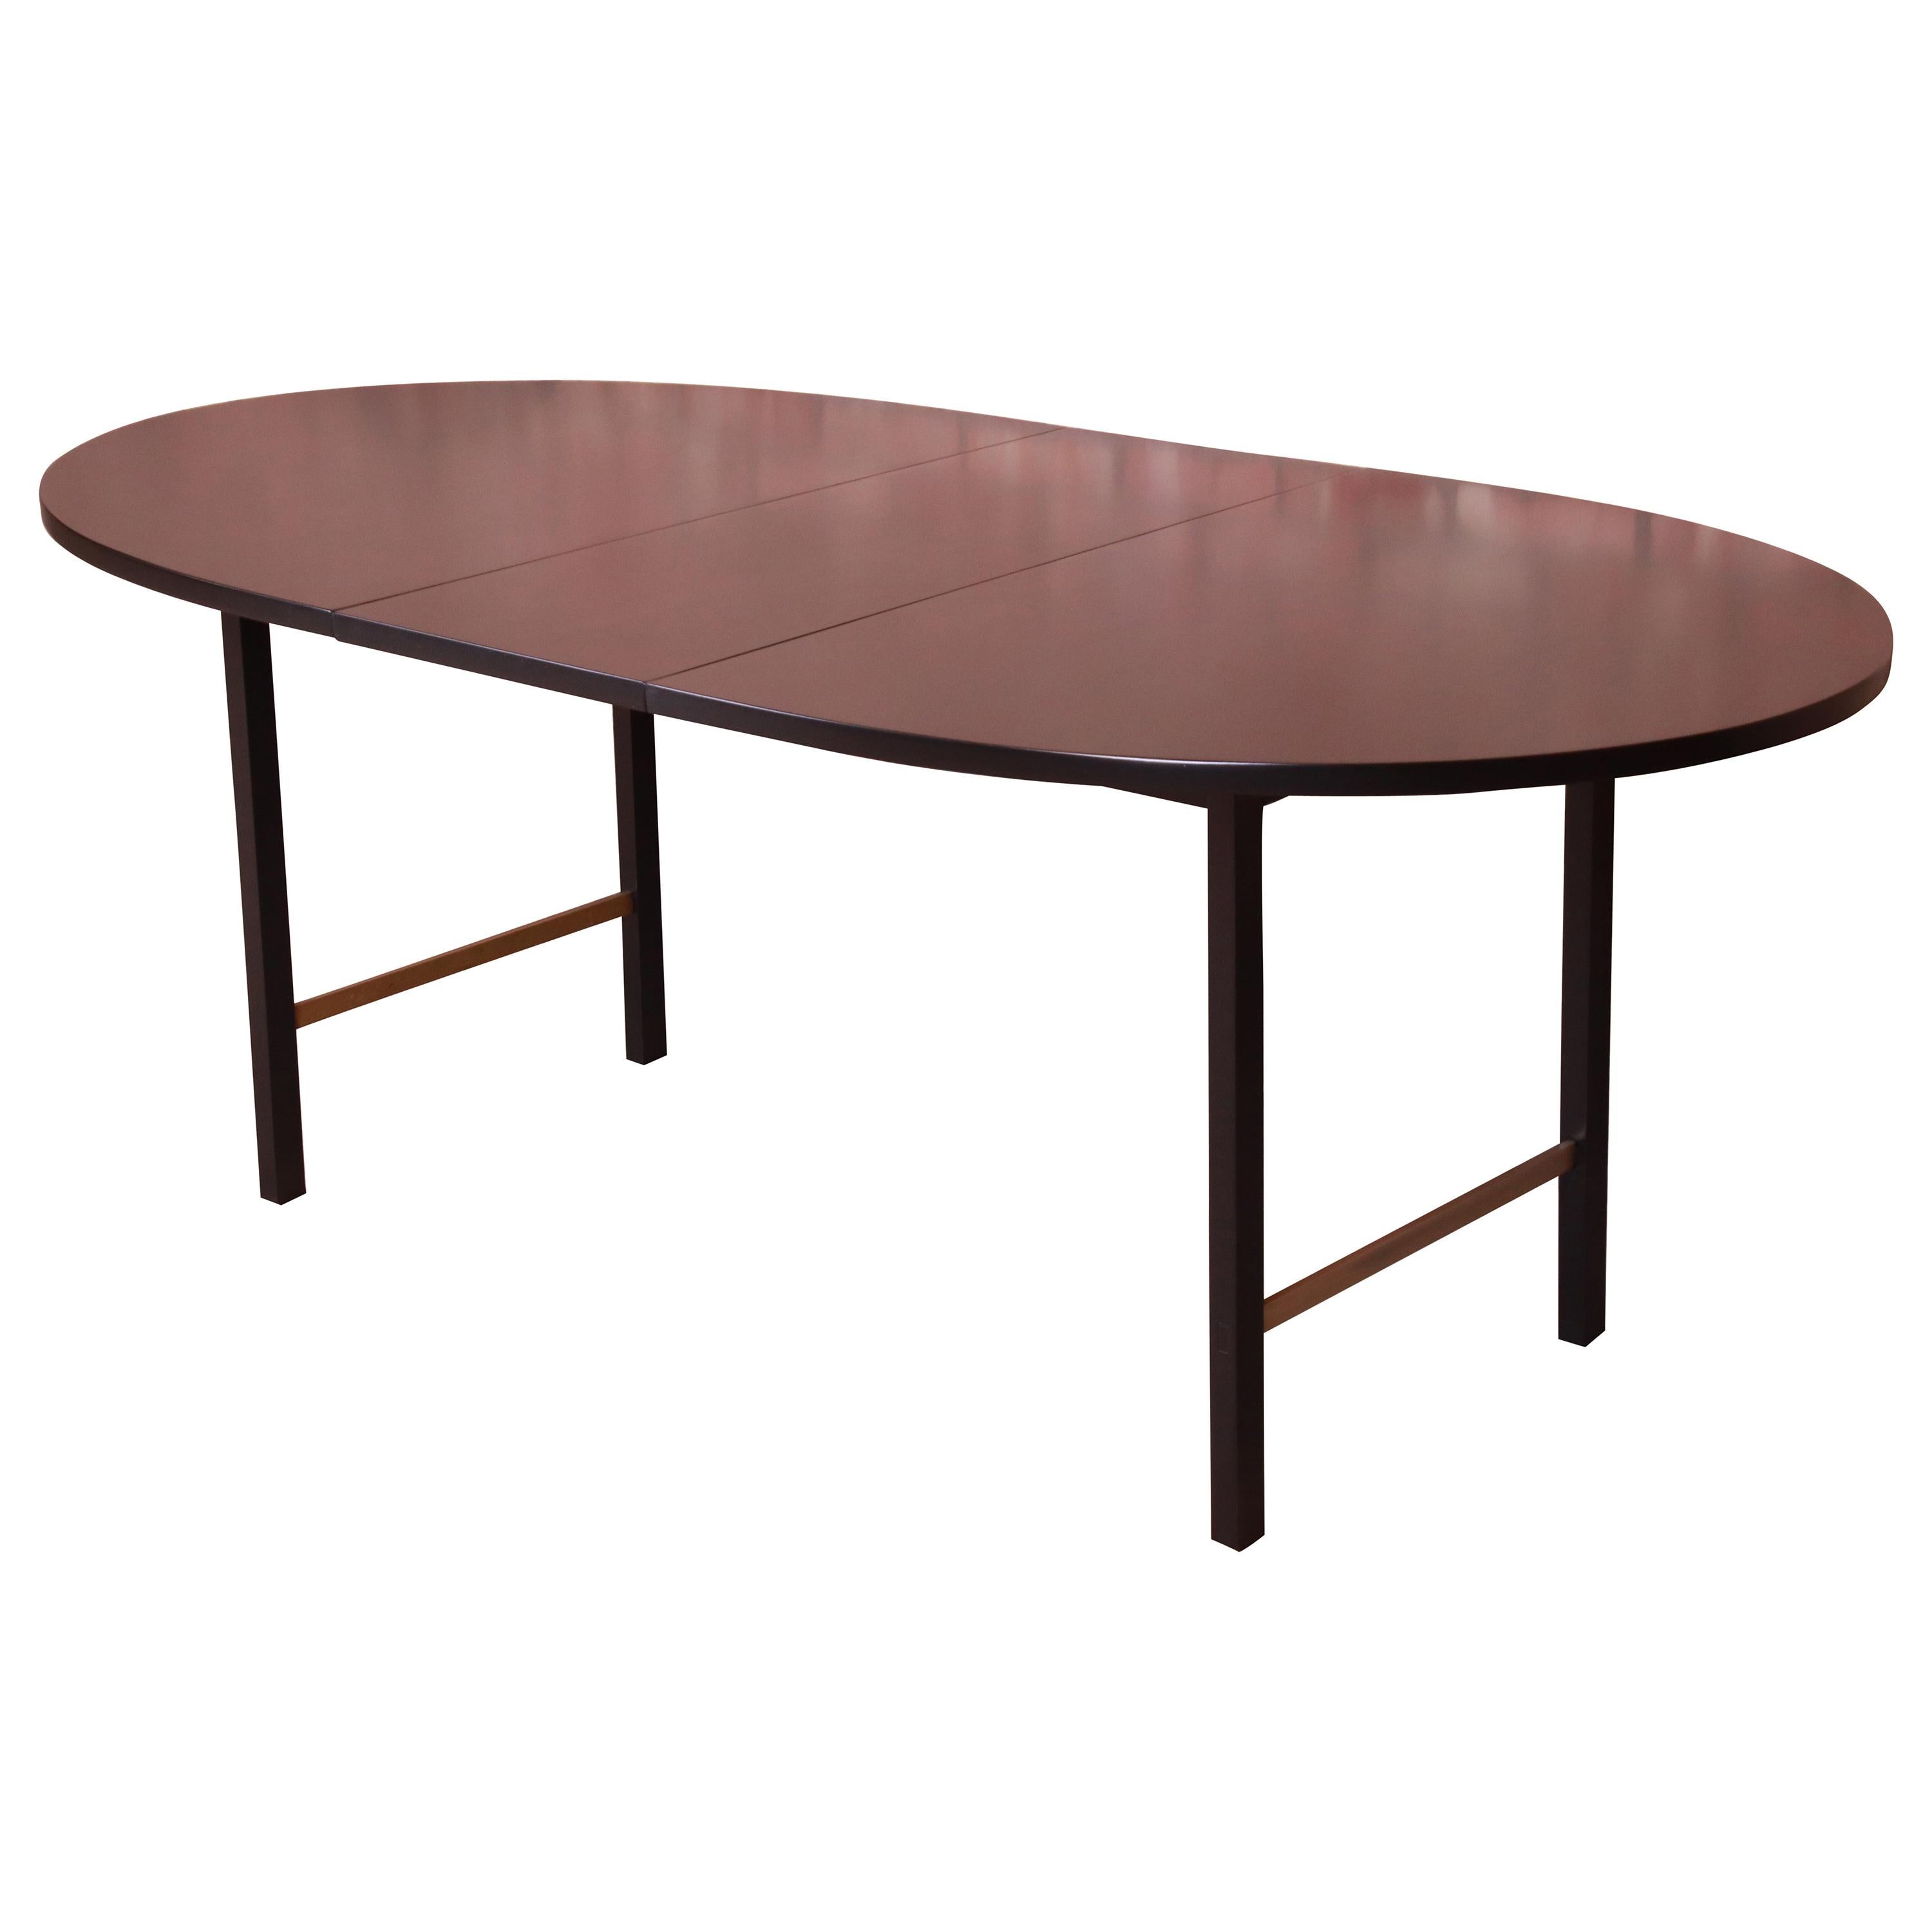 Paul McCobb for Calvin Black Lacquer and Brass Dining Table, Newly Refinished